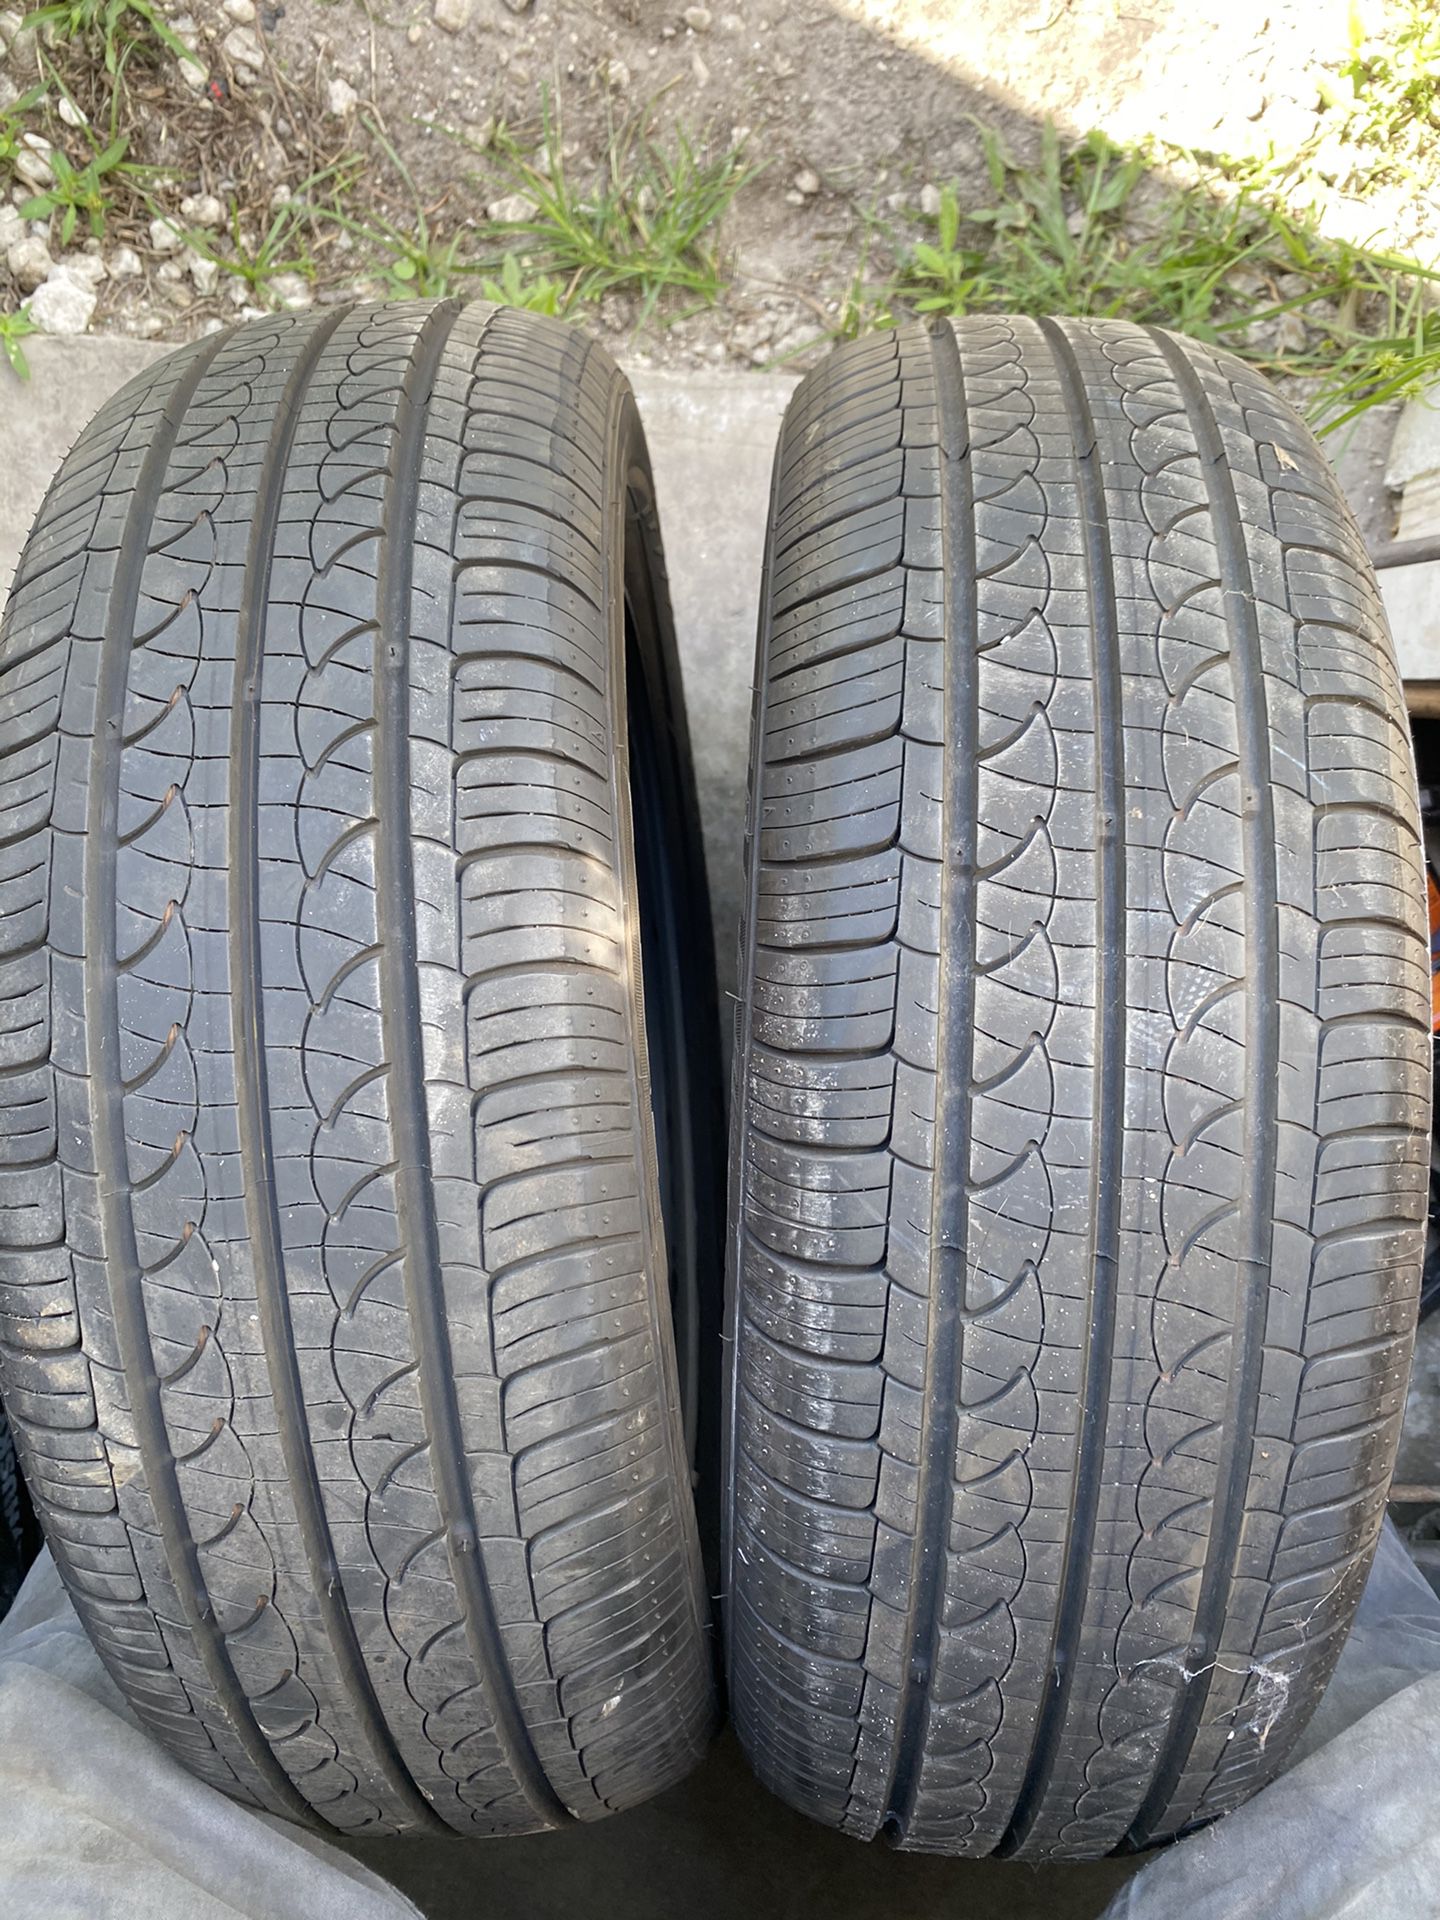 Used 195 65 15” used tires set of two